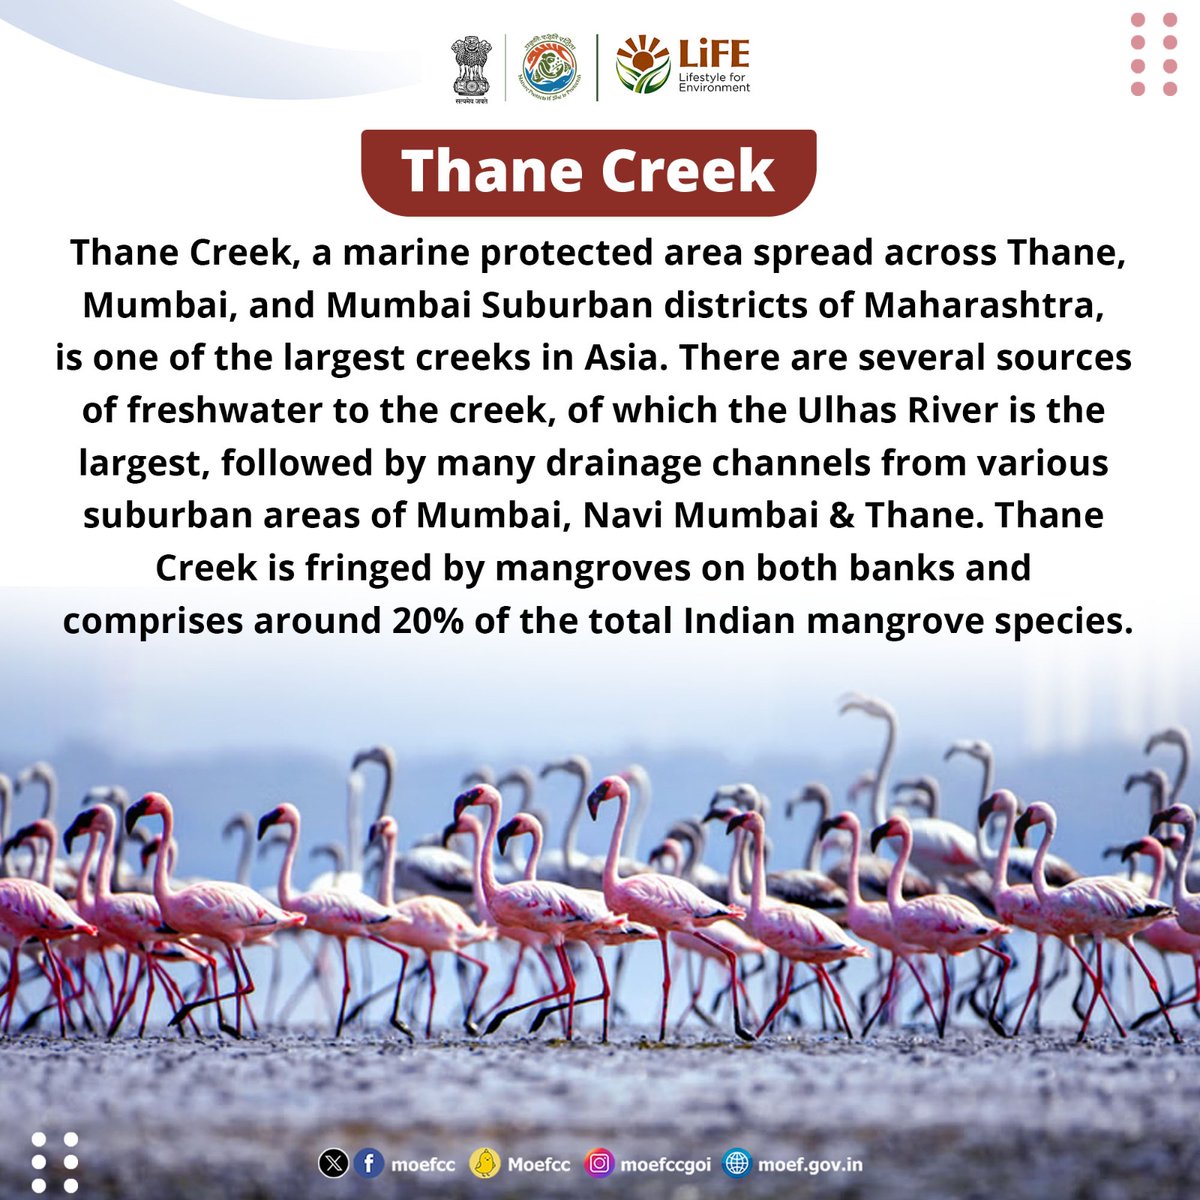 Discovering India's Ramsar Sites      

Day 77: Thane Creek     

From wetlands to wildlife, each site is a unique haven for nature. Let's celebrate and safeguard these vital ecosystems together!      

#RamsarSites #MissionLiFE #ProPlanetPeople